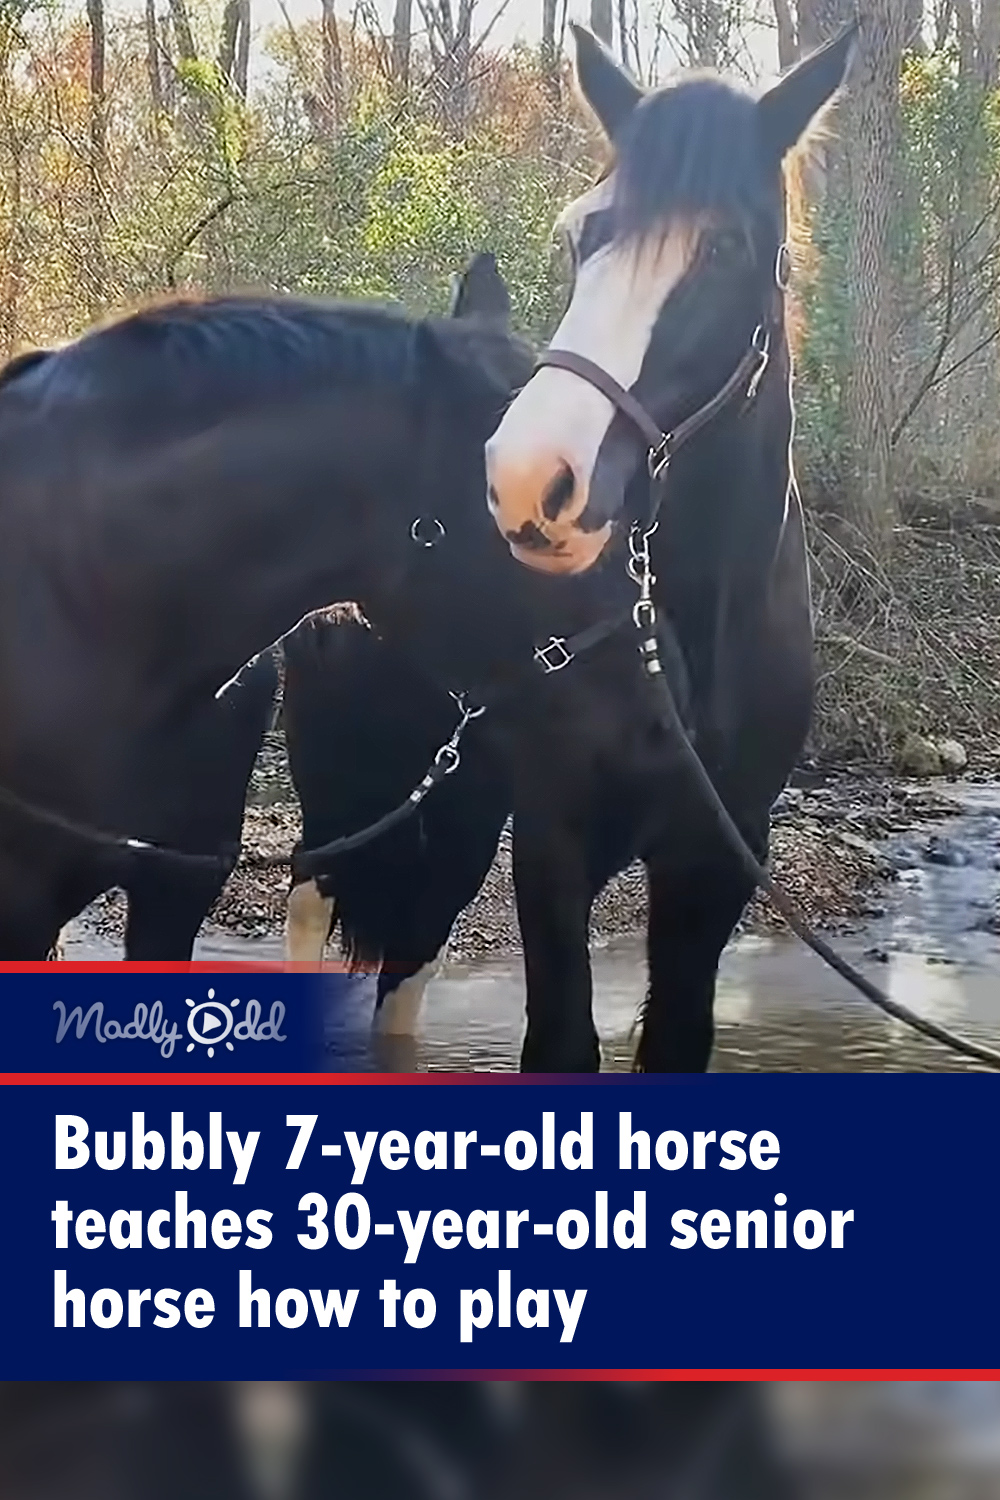 Bubbly 7-year-old horse teaches 30-year-old senior horse how to play